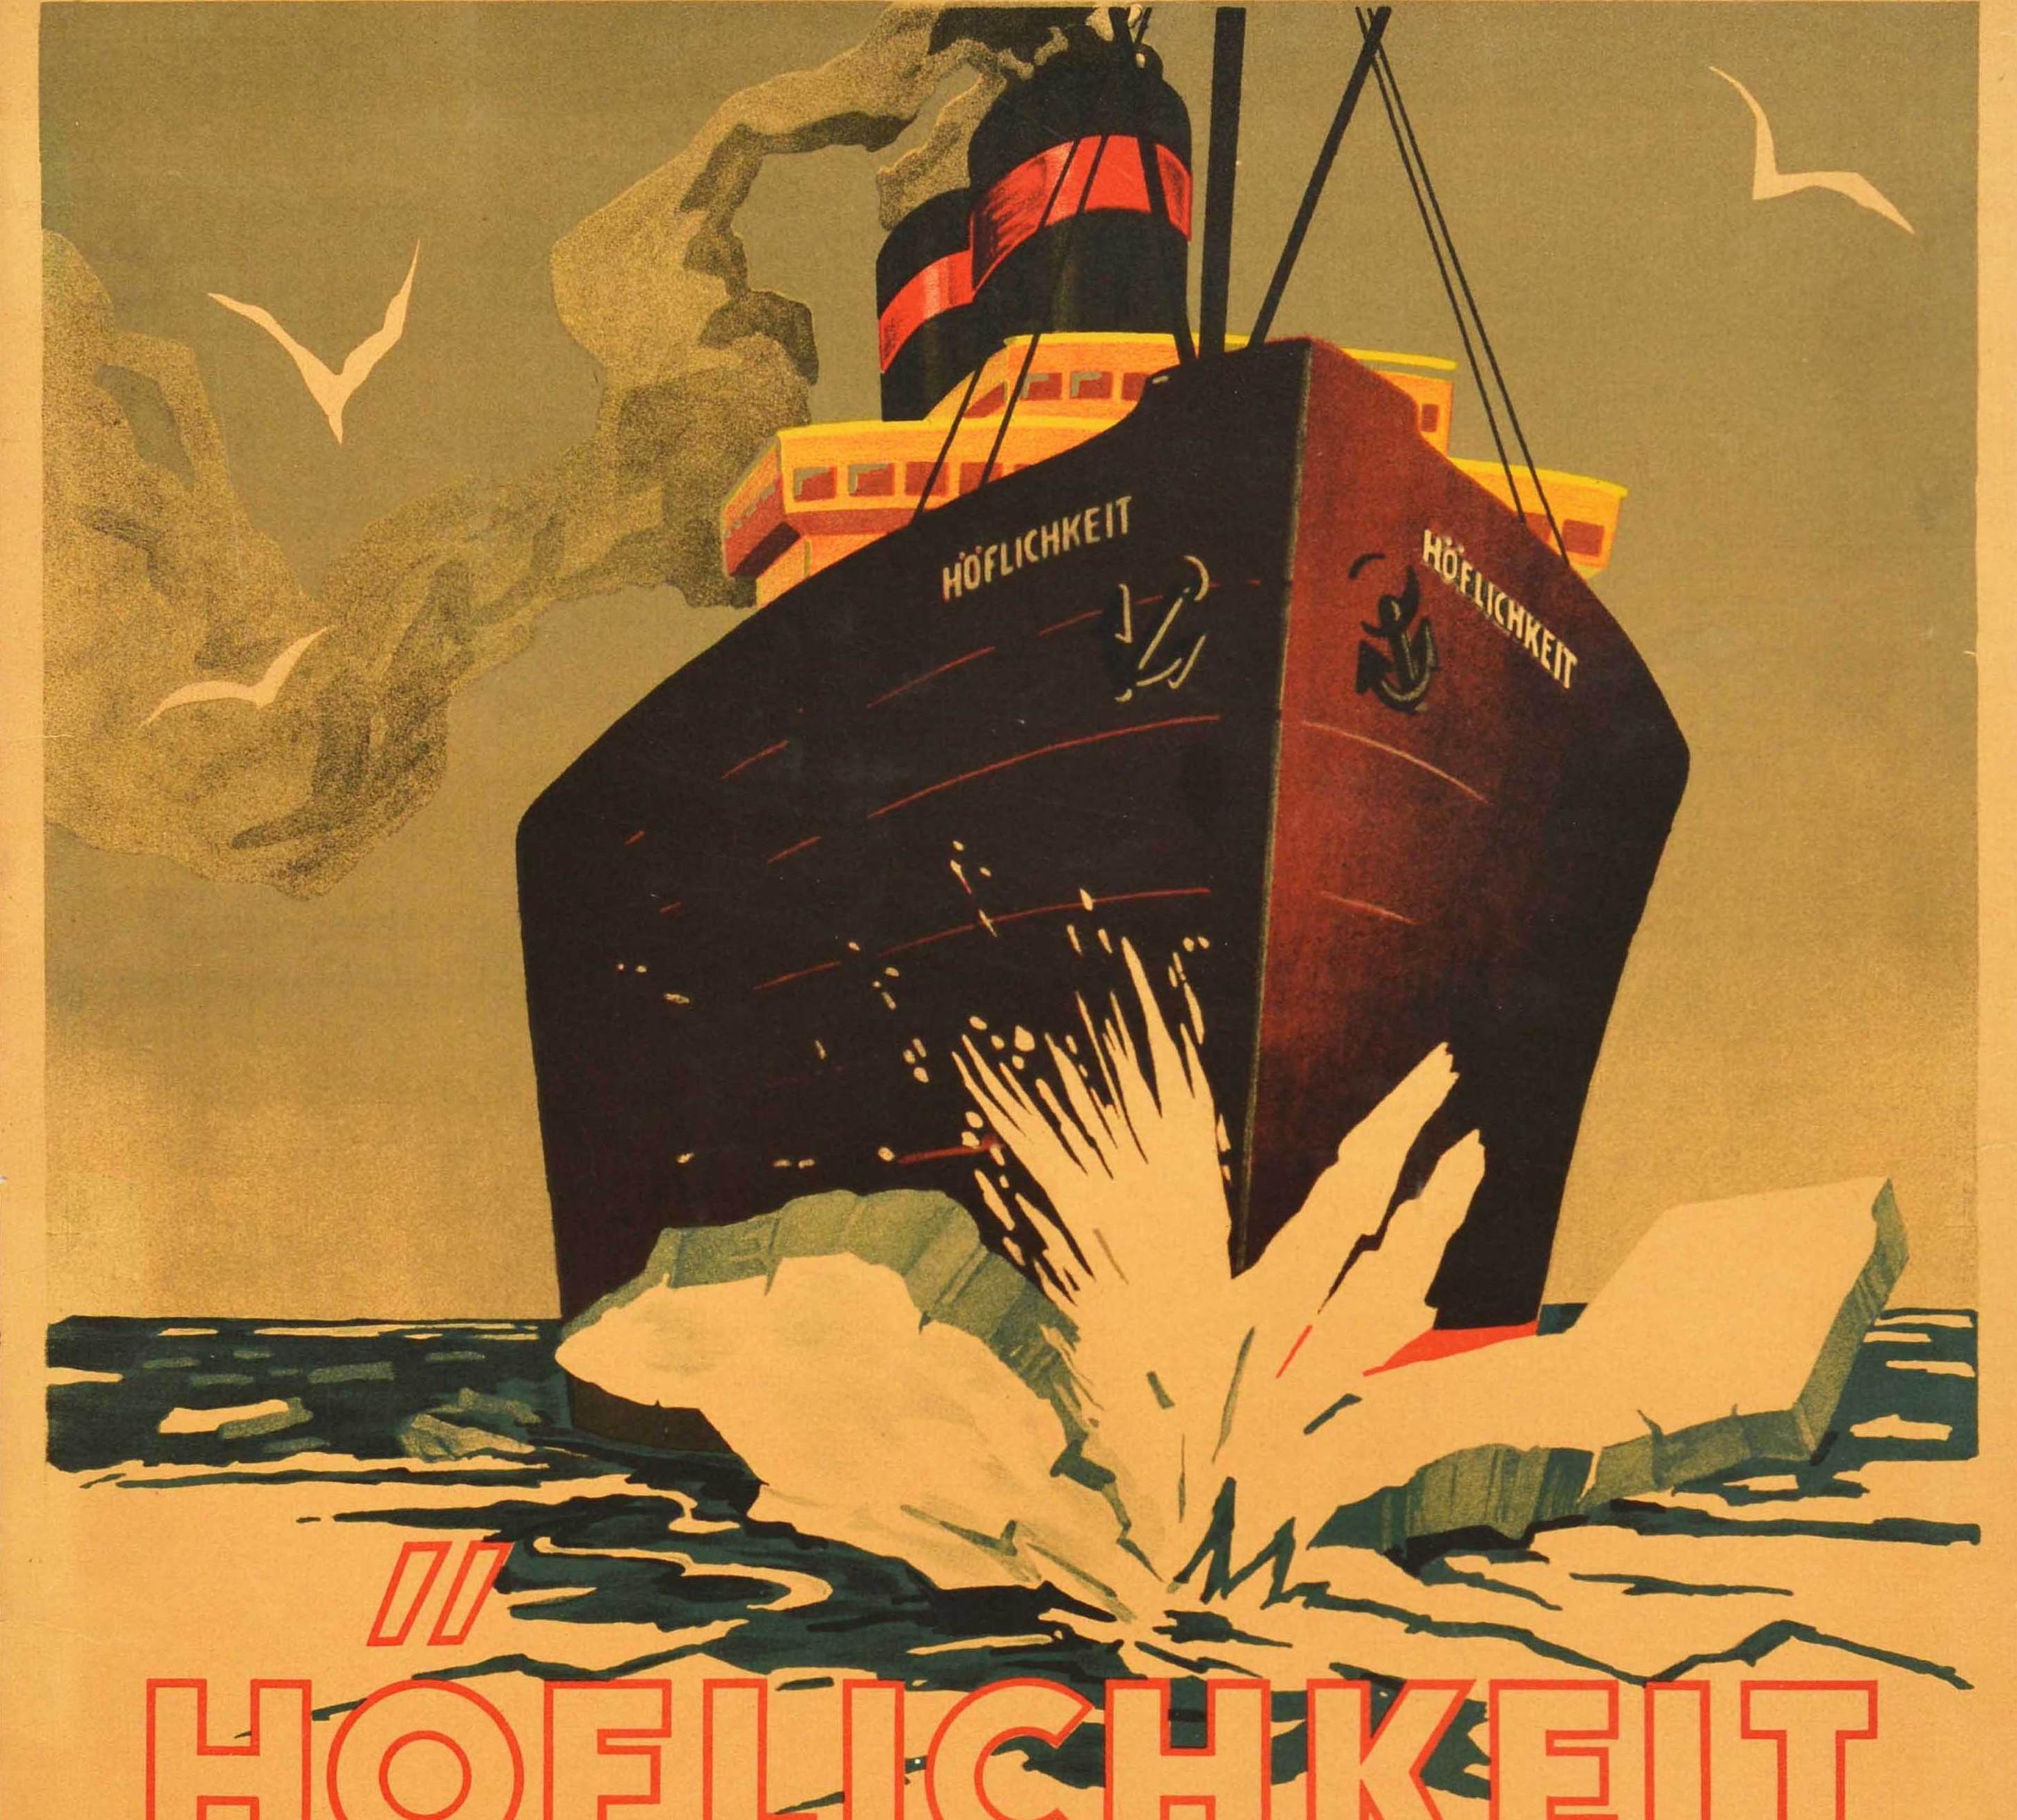 Original Vintage Motivation Poster Hoflichkeit Courtesy Breaks Resistance Quote In Good Condition For Sale In London, GB